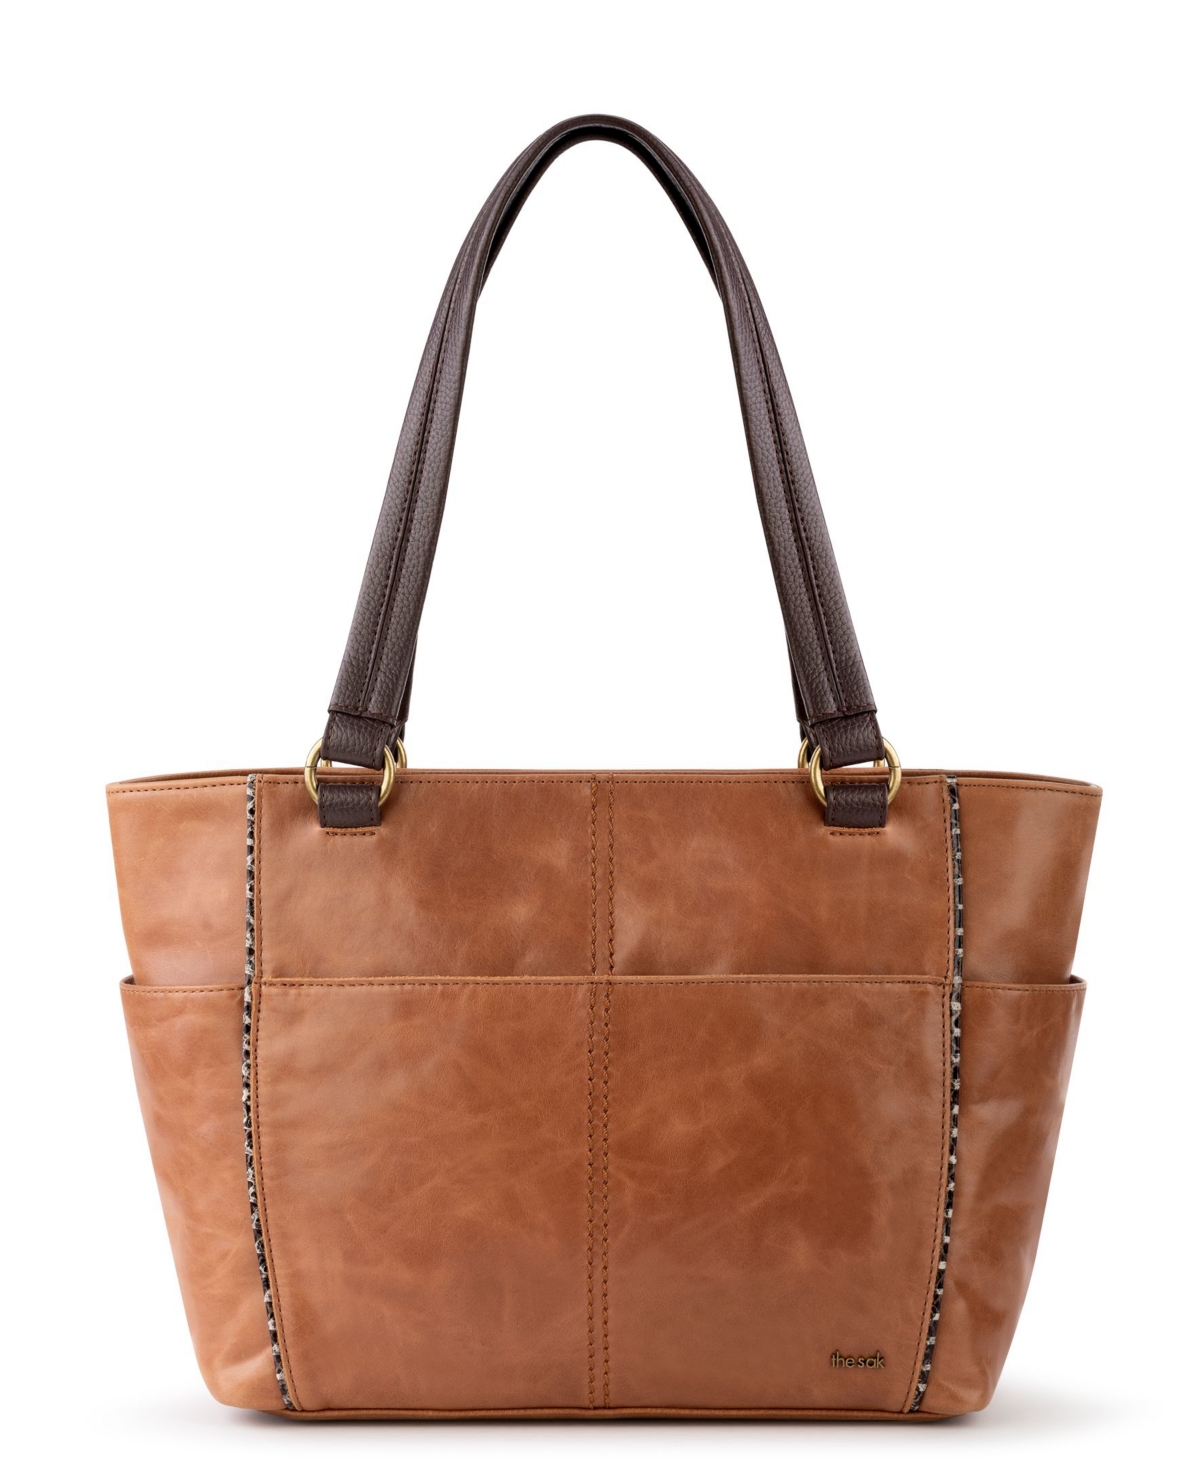 THE SAK ASHBY LEATHER TOTE